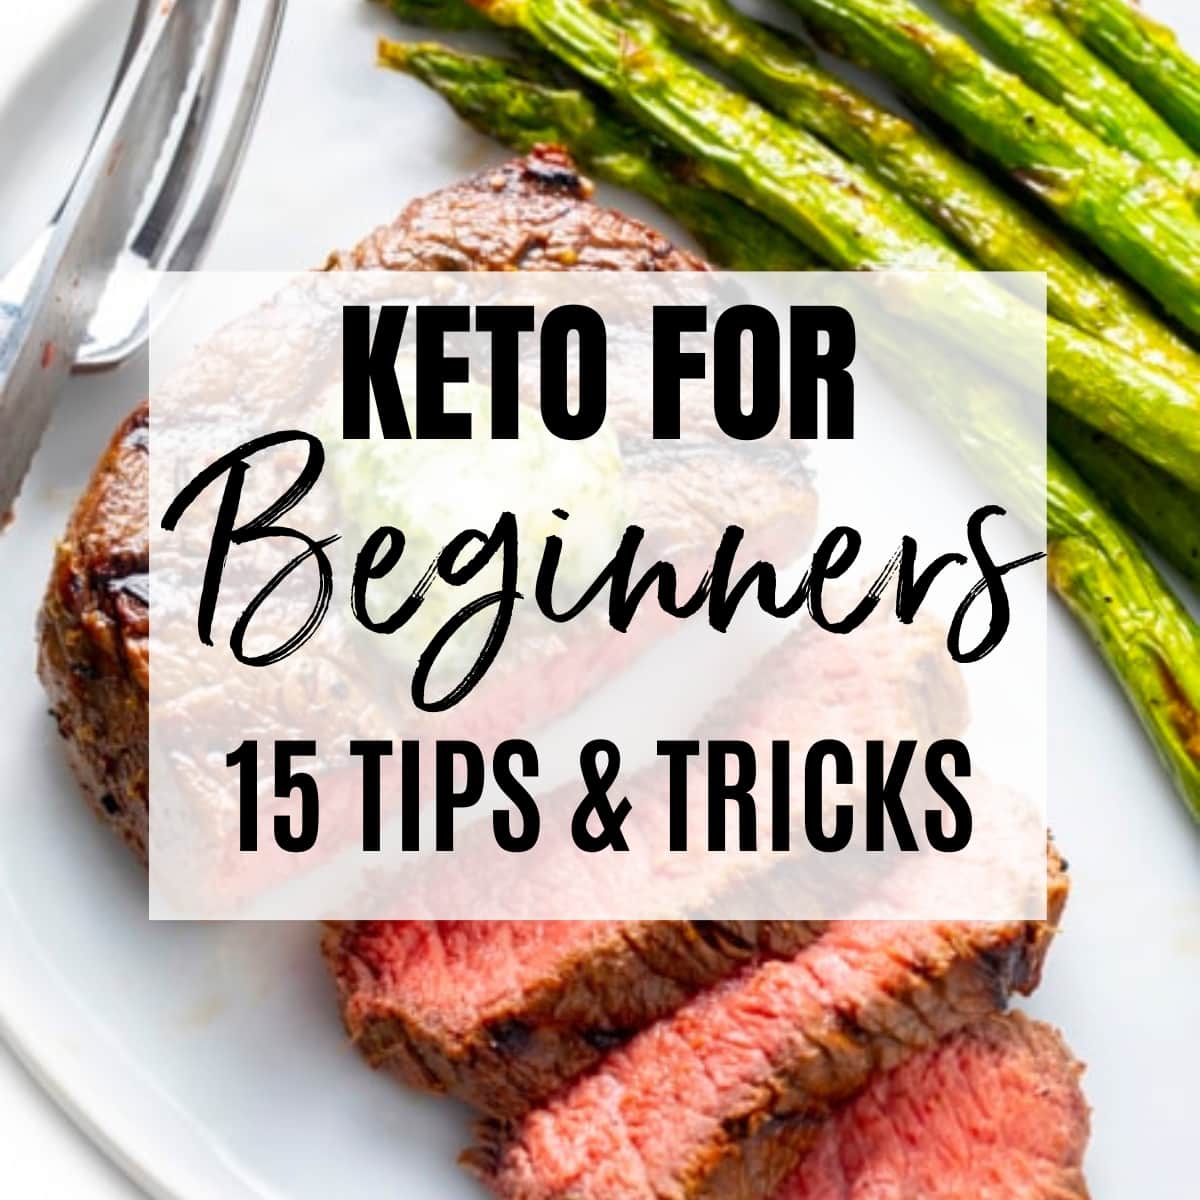 Keto For Beginners: Tips and Tricks.